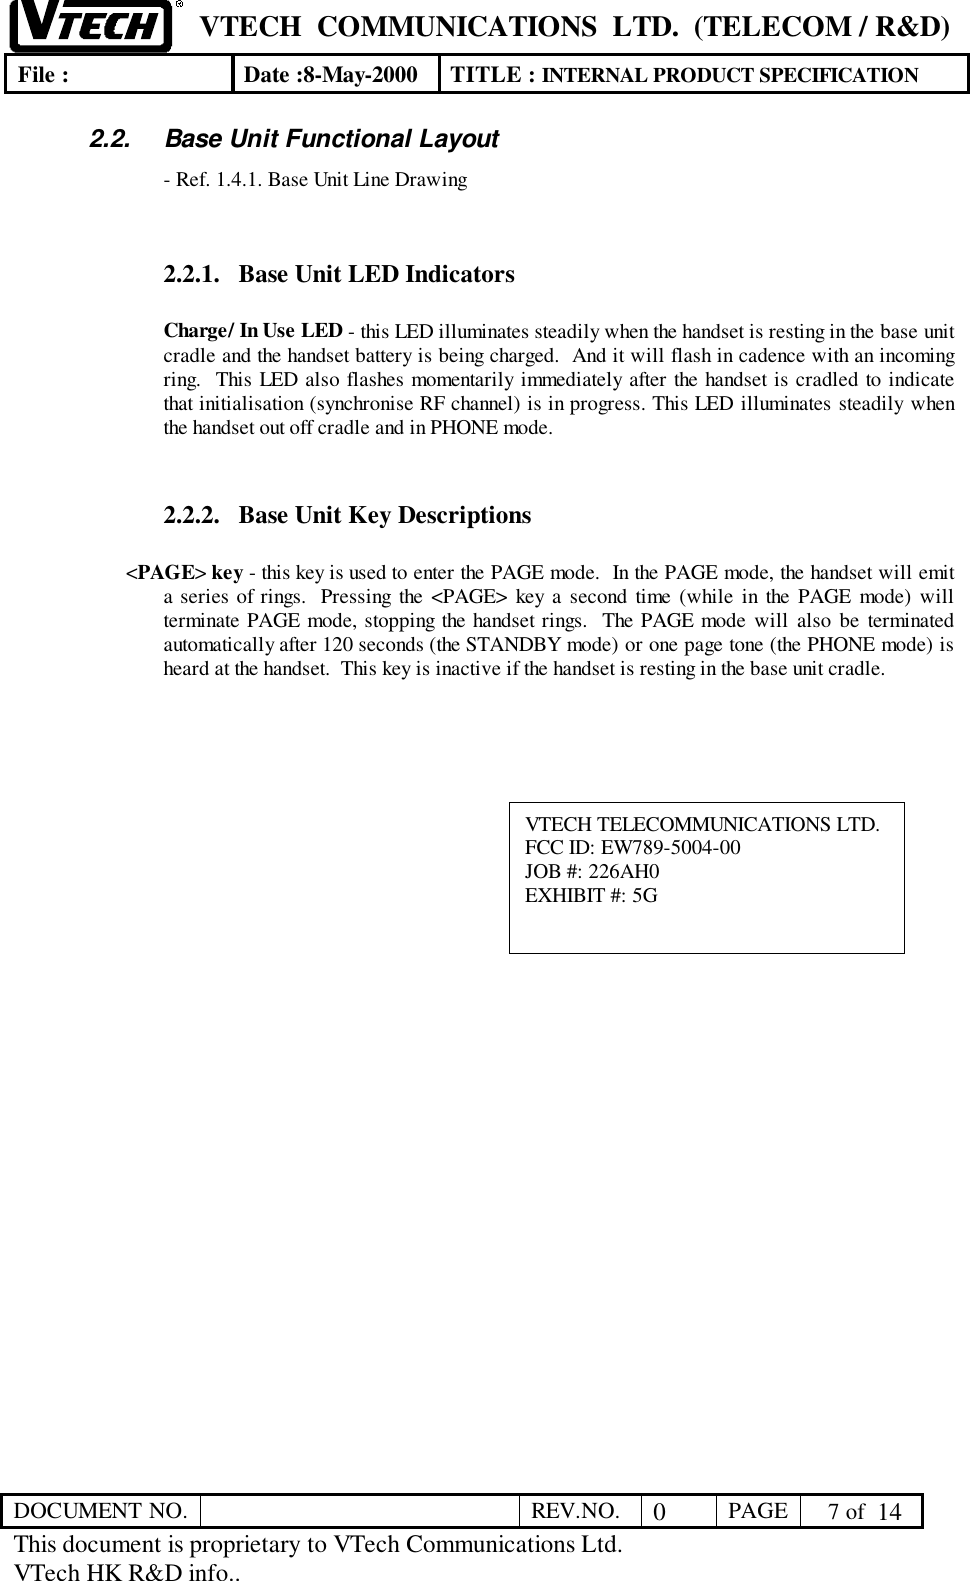 VTECH  COMMUNICATIONS  LTD.  (TELECOM / R&amp;D)File : Date :8-May-2000 TITLE : INTERNAL PRODUCT SPECIFICATIONDOCUMENT NO. REV.NO. 0PAGE  7 of  14This document is proprietary to VTech Communications Ltd.VTech HK R&amp;D info..2.2.  Base Unit Functional Layout- Ref. 1.4.1. Base Unit Line Drawing2.2.1. Base Unit LED IndicatorsCharge/ In Use LED - this LED illuminates steadily when the handset is resting in the base unitcradle and the handset battery is being charged.  And it will flash in cadence with an incomingring.  This LED also flashes momentarily immediately after the handset is cradled to indicatethat initialisation (synchronise RF channel) is in progress. This LED illuminates steadily whenthe handset out off cradle and in PHONE mode.2.2.2. Base Unit Key Descriptions&lt;PAGE&gt; key - this key is used to enter the PAGE mode.  In the PAGE mode, the handset will emita series of rings.  Pressing the &lt;PAGE&gt; key a second time (while in the PAGE mode) willterminate PAGE mode, stopping the handset rings.  The PAGE mode will also be terminatedautomatically after 120 seconds (the STANDBY mode) or one page tone (the PHONE mode) isheard at the handset.  This key is inactive if the handset is resting in the base unit cradle.VTECH TELECOMMUNICATIONS LTD.FCC ID: EW789-5004-00JOB #: 226AH0EXHIBIT #: 5G